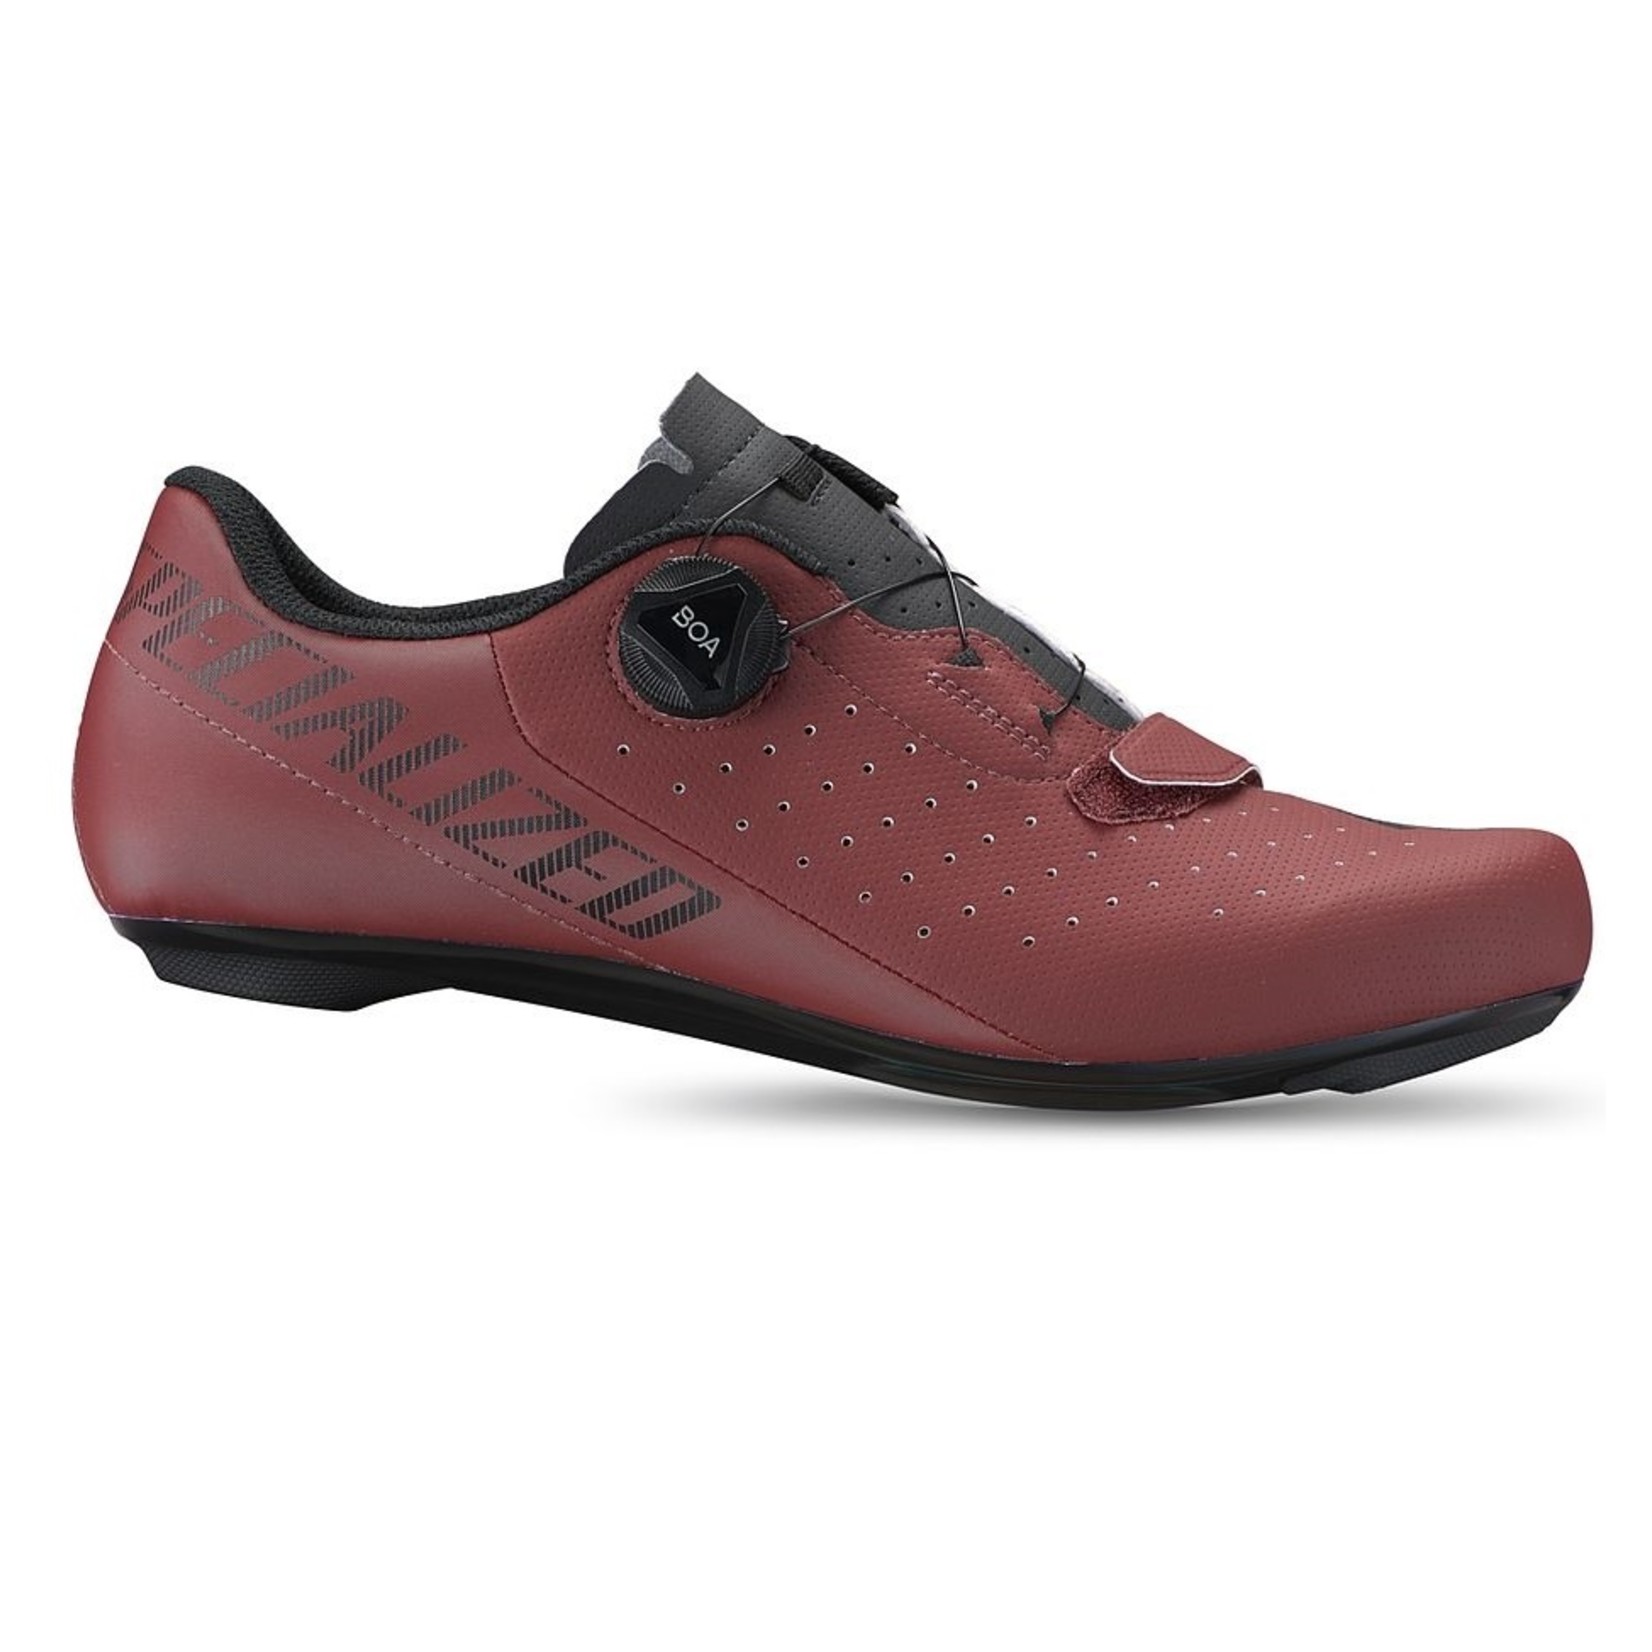 SPECIALIZED TORCH 1.0 ROAD SHOES